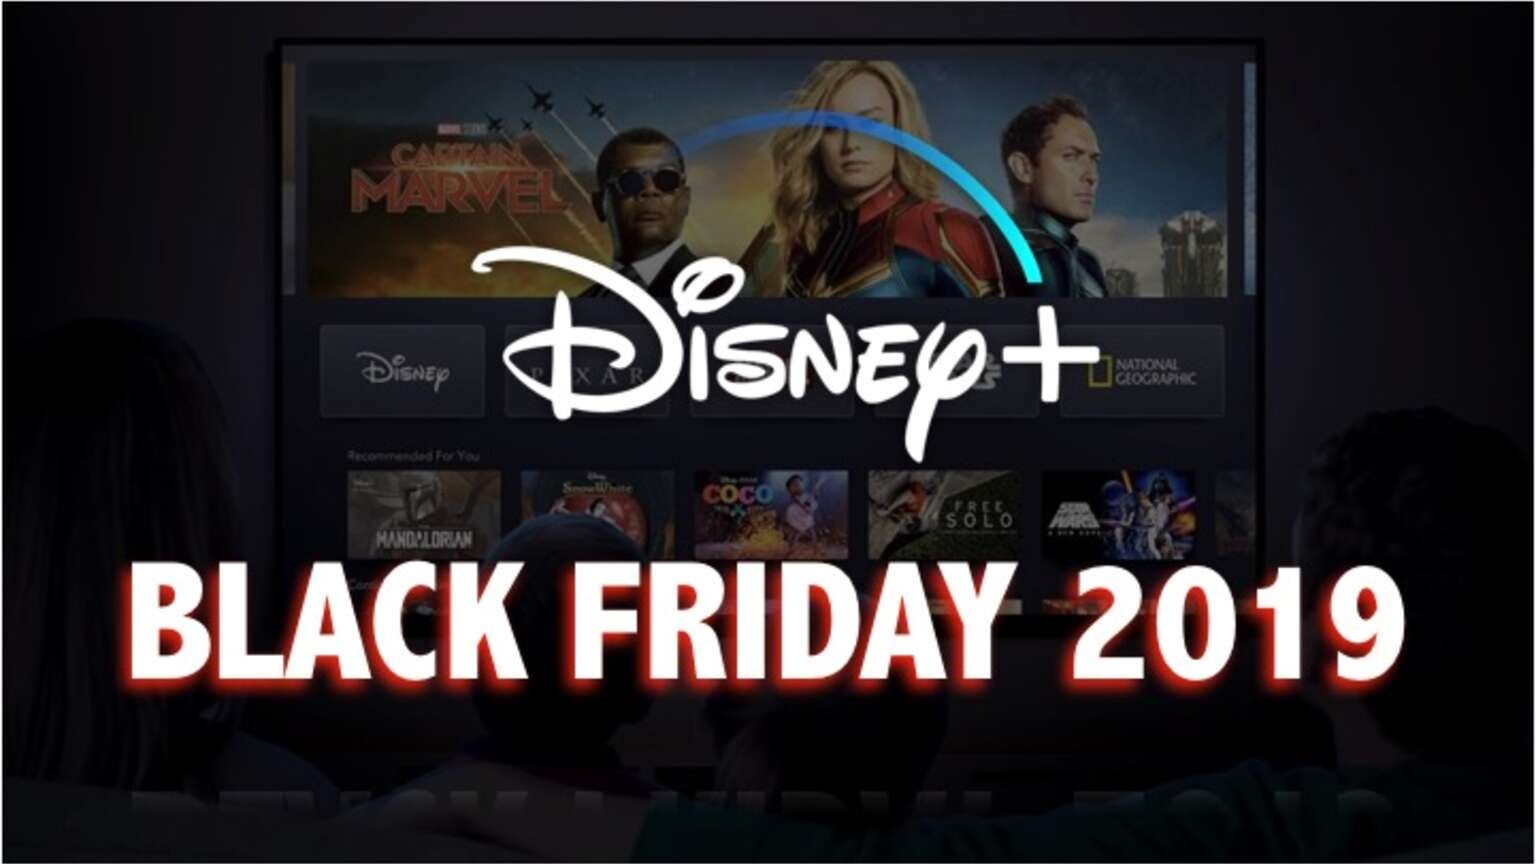 Disney Plus Black Friday & Cyber Monday 2019 Deals What Are the Best